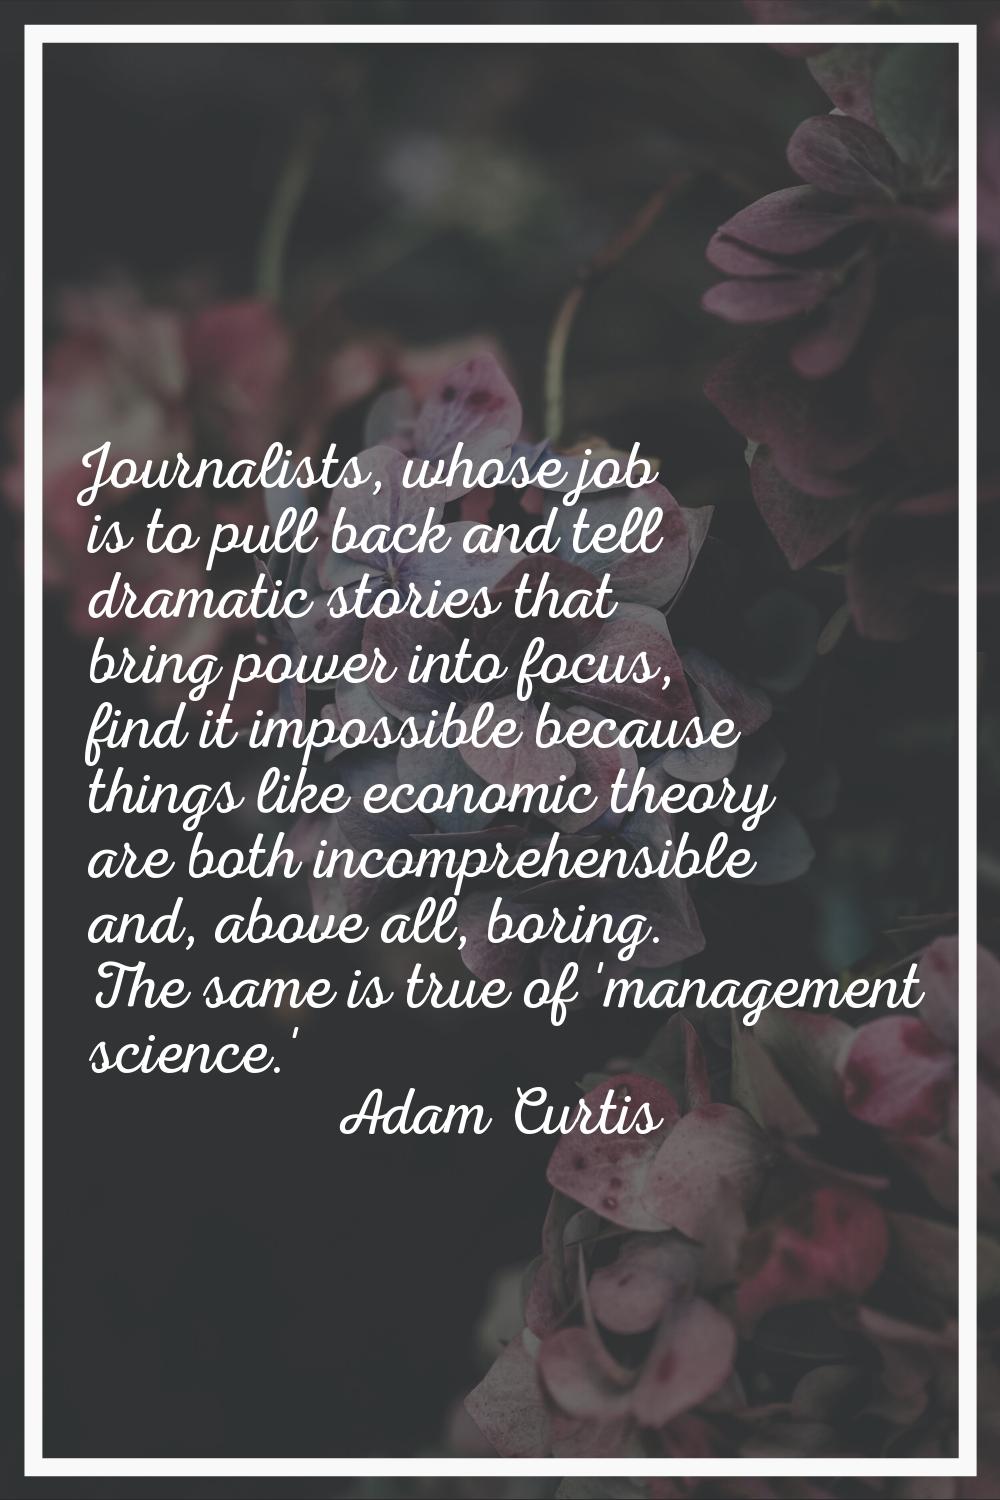 Journalists, whose job is to pull back and tell dramatic stories that bring power into focus, find 